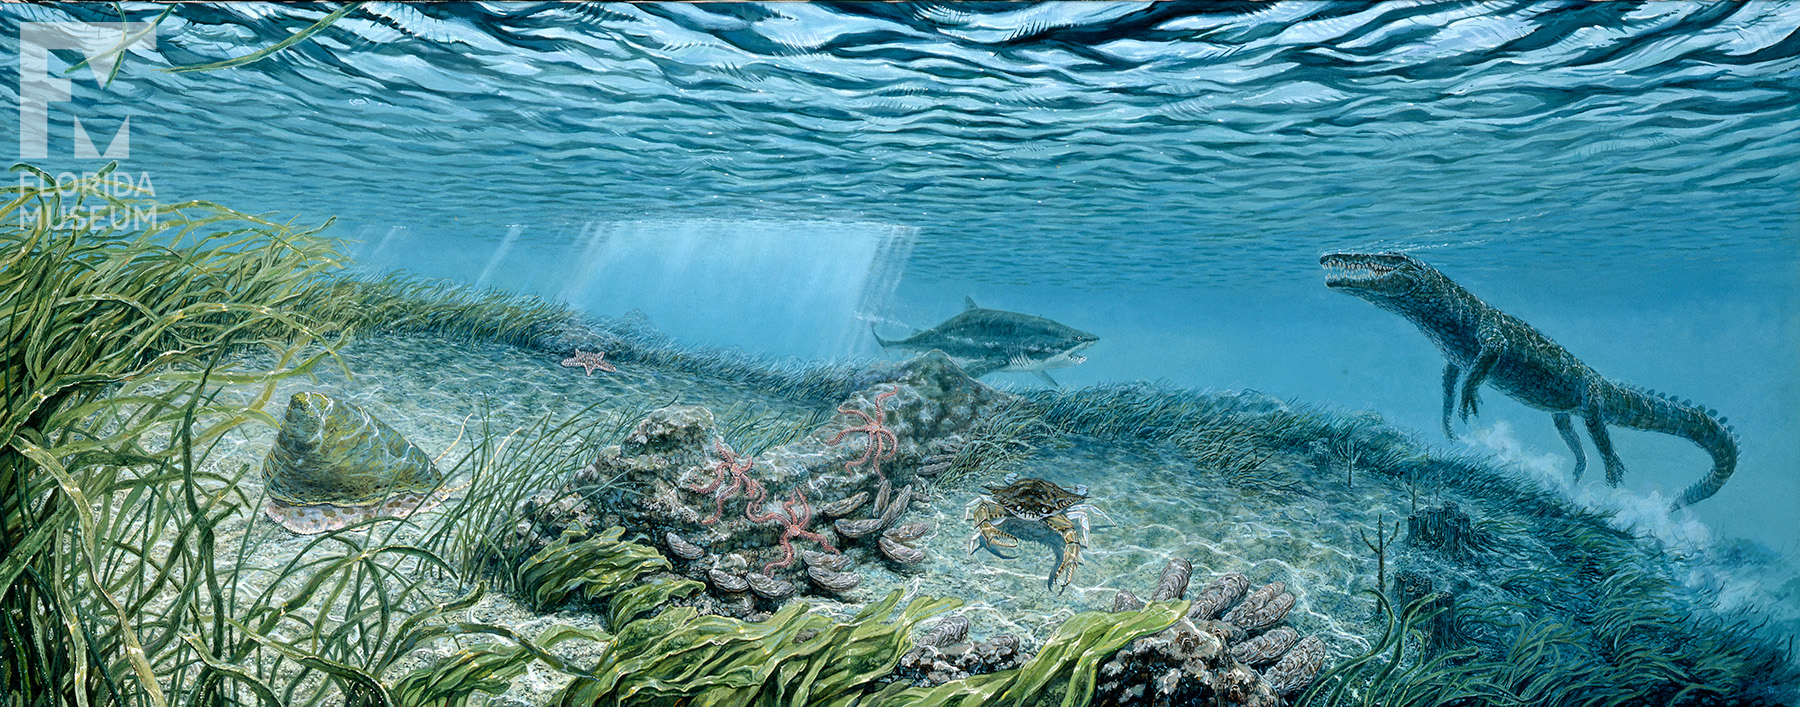 painting showing underwater scene of Florida Eocene including a crocodilian, shark, coral, oyster, and sea grass